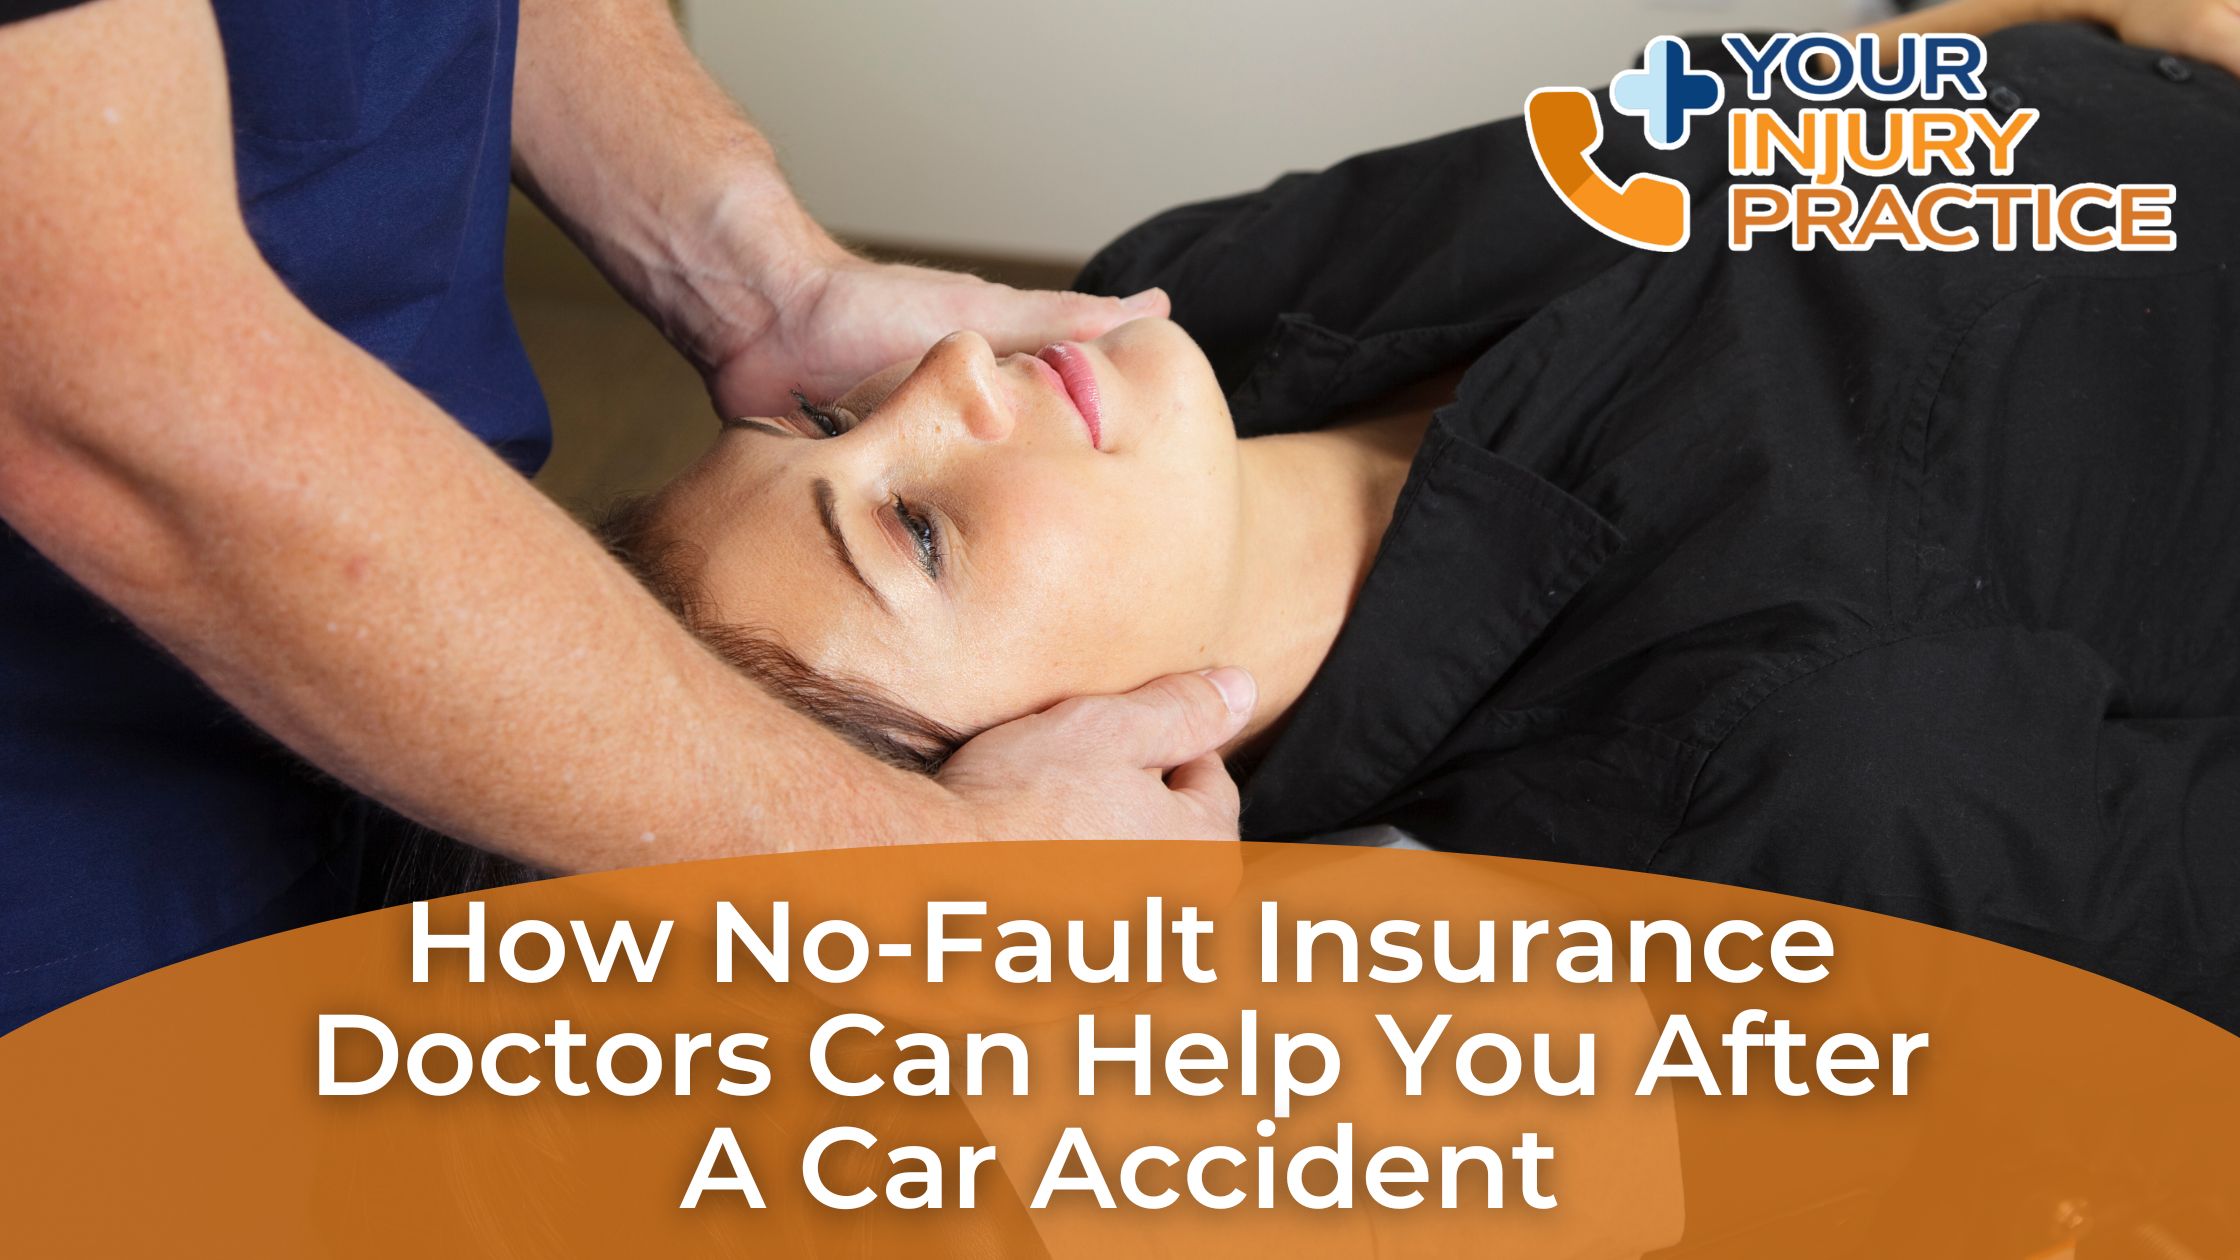 How No Fault Insurance Doctors Can Help After a Car Accident